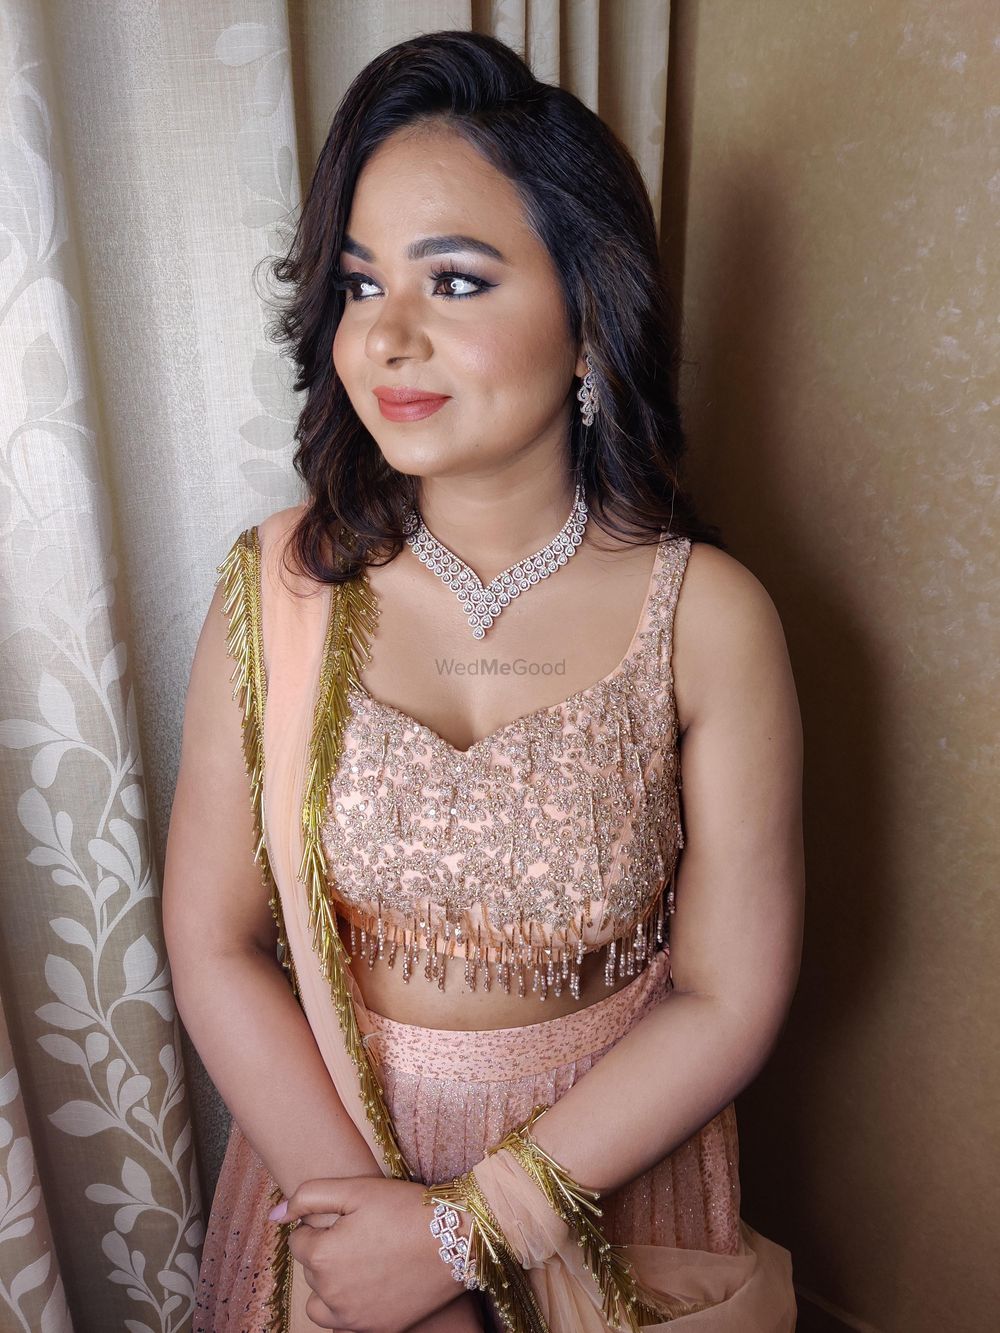 Photo From Sukriti - By Divya Singh Makeovers